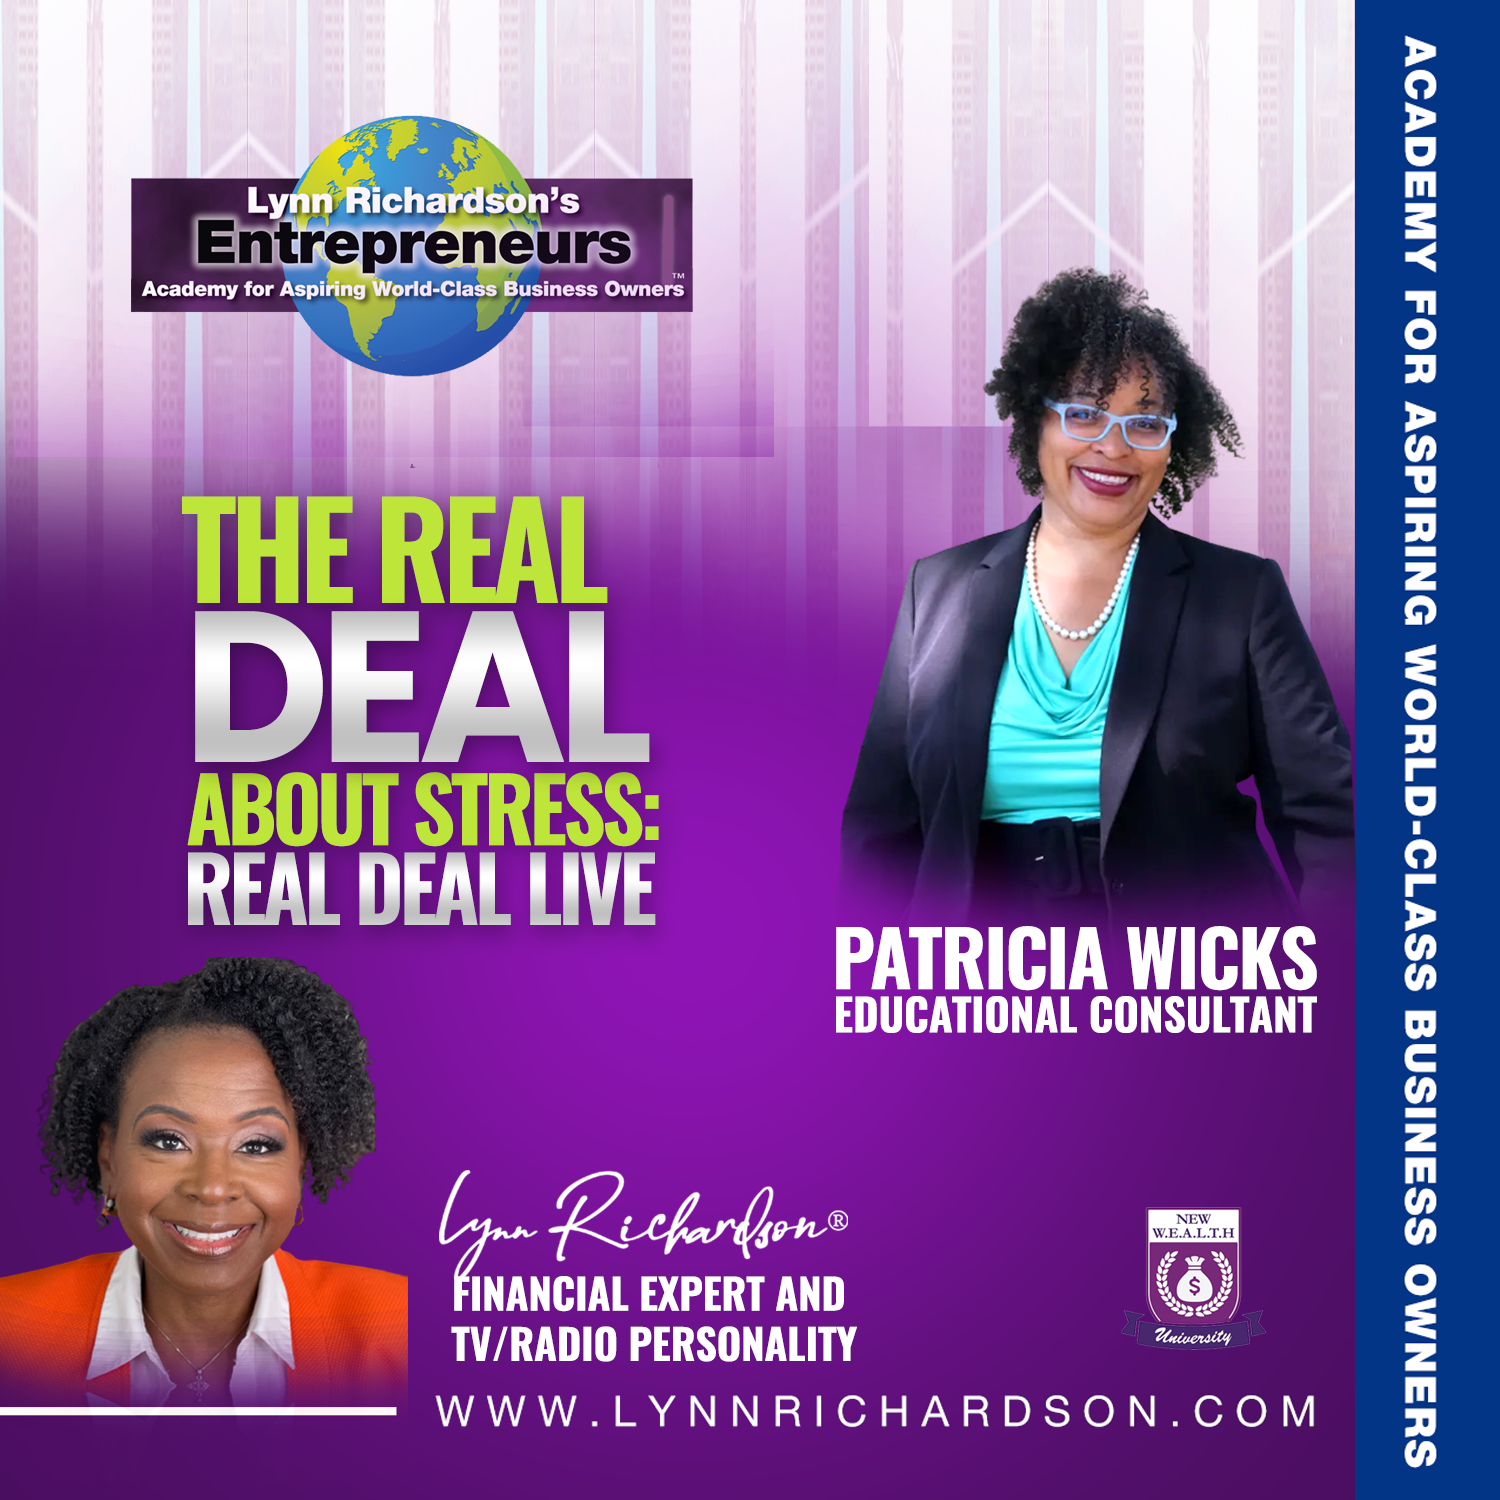 Real Deal About Stress: Real Deal Live!